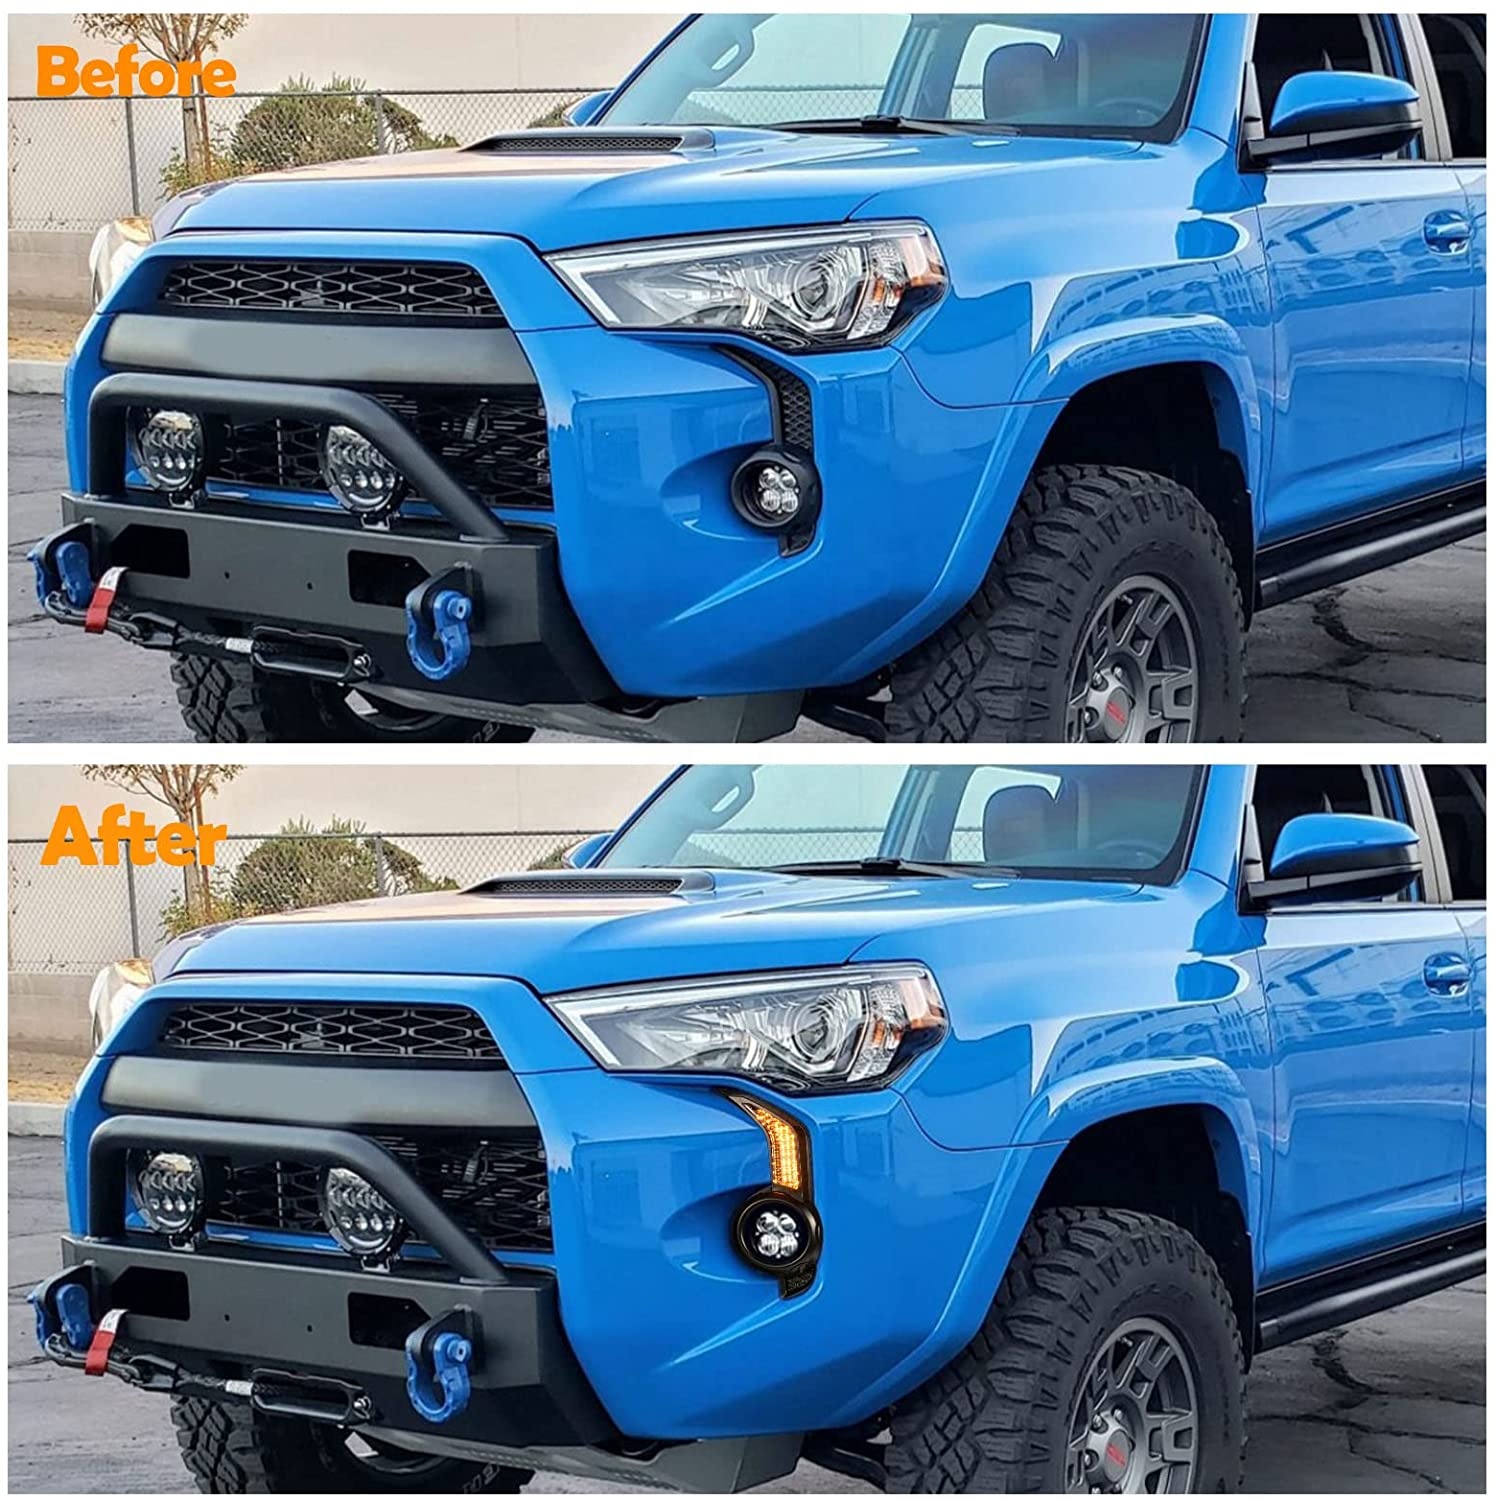 LED DRL Daytime Running Light Front Fog Daytime Running Lamps with Dynamic Sequential Turn Signal Lights For 4 Runner 2014-2021